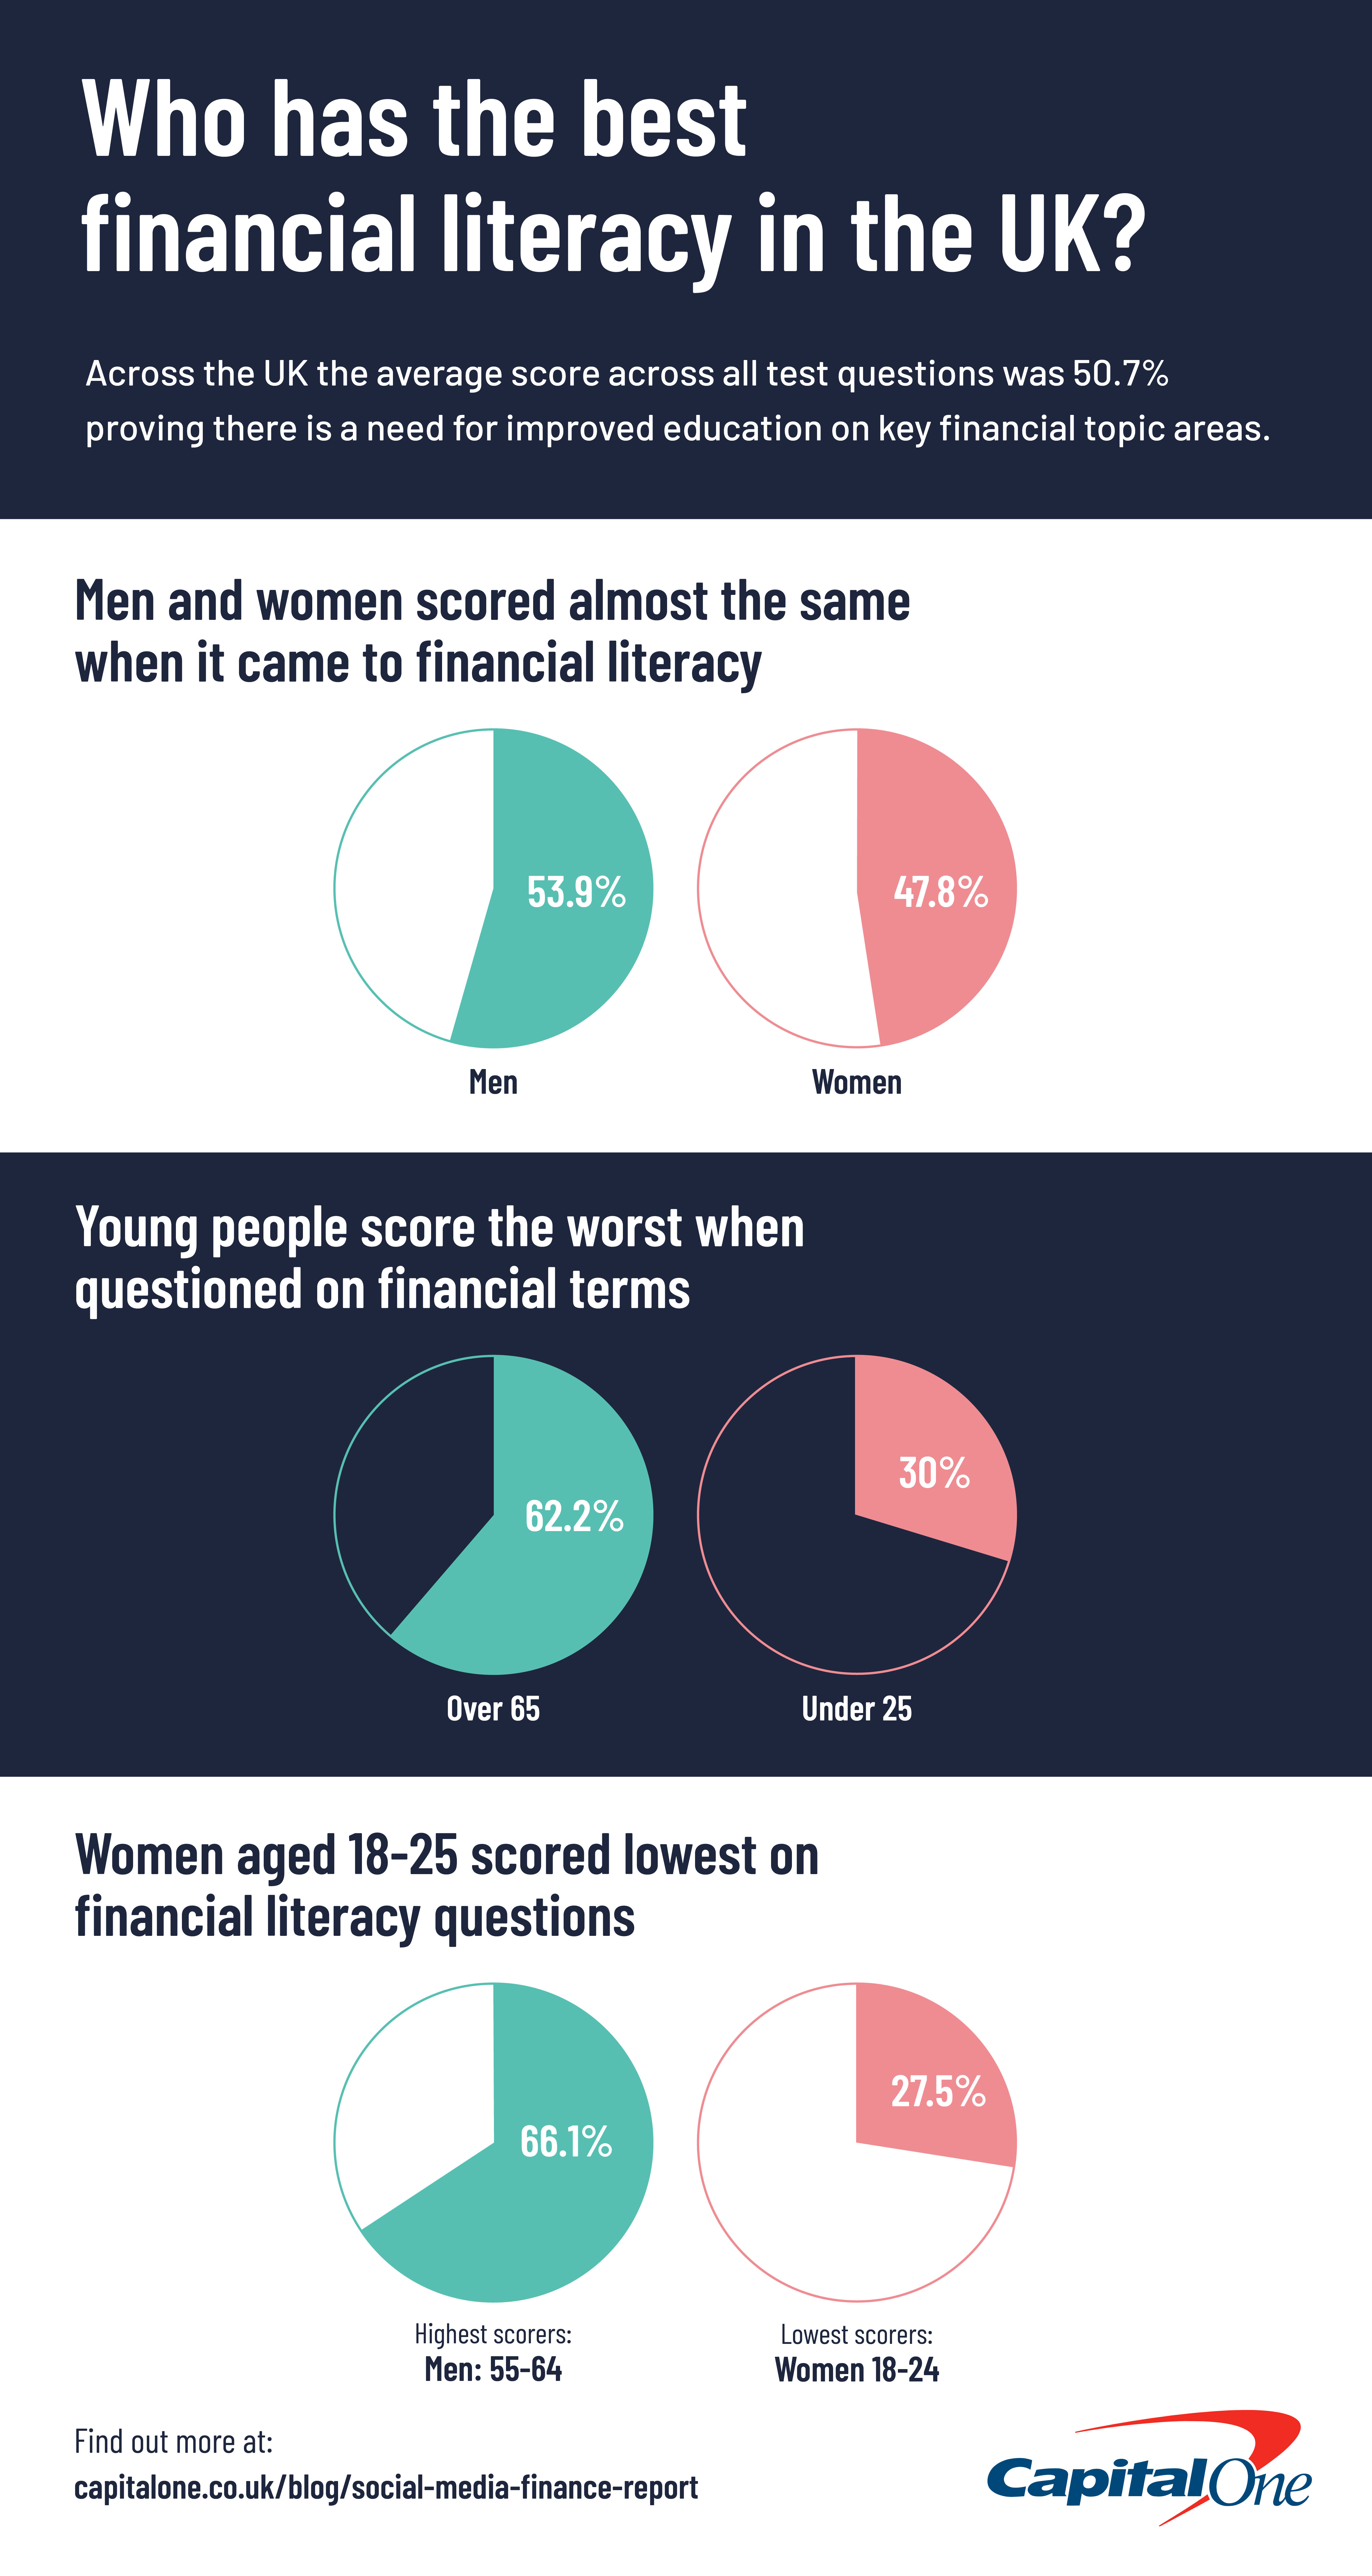 Diagram showing who has the best financial literacy in the UK